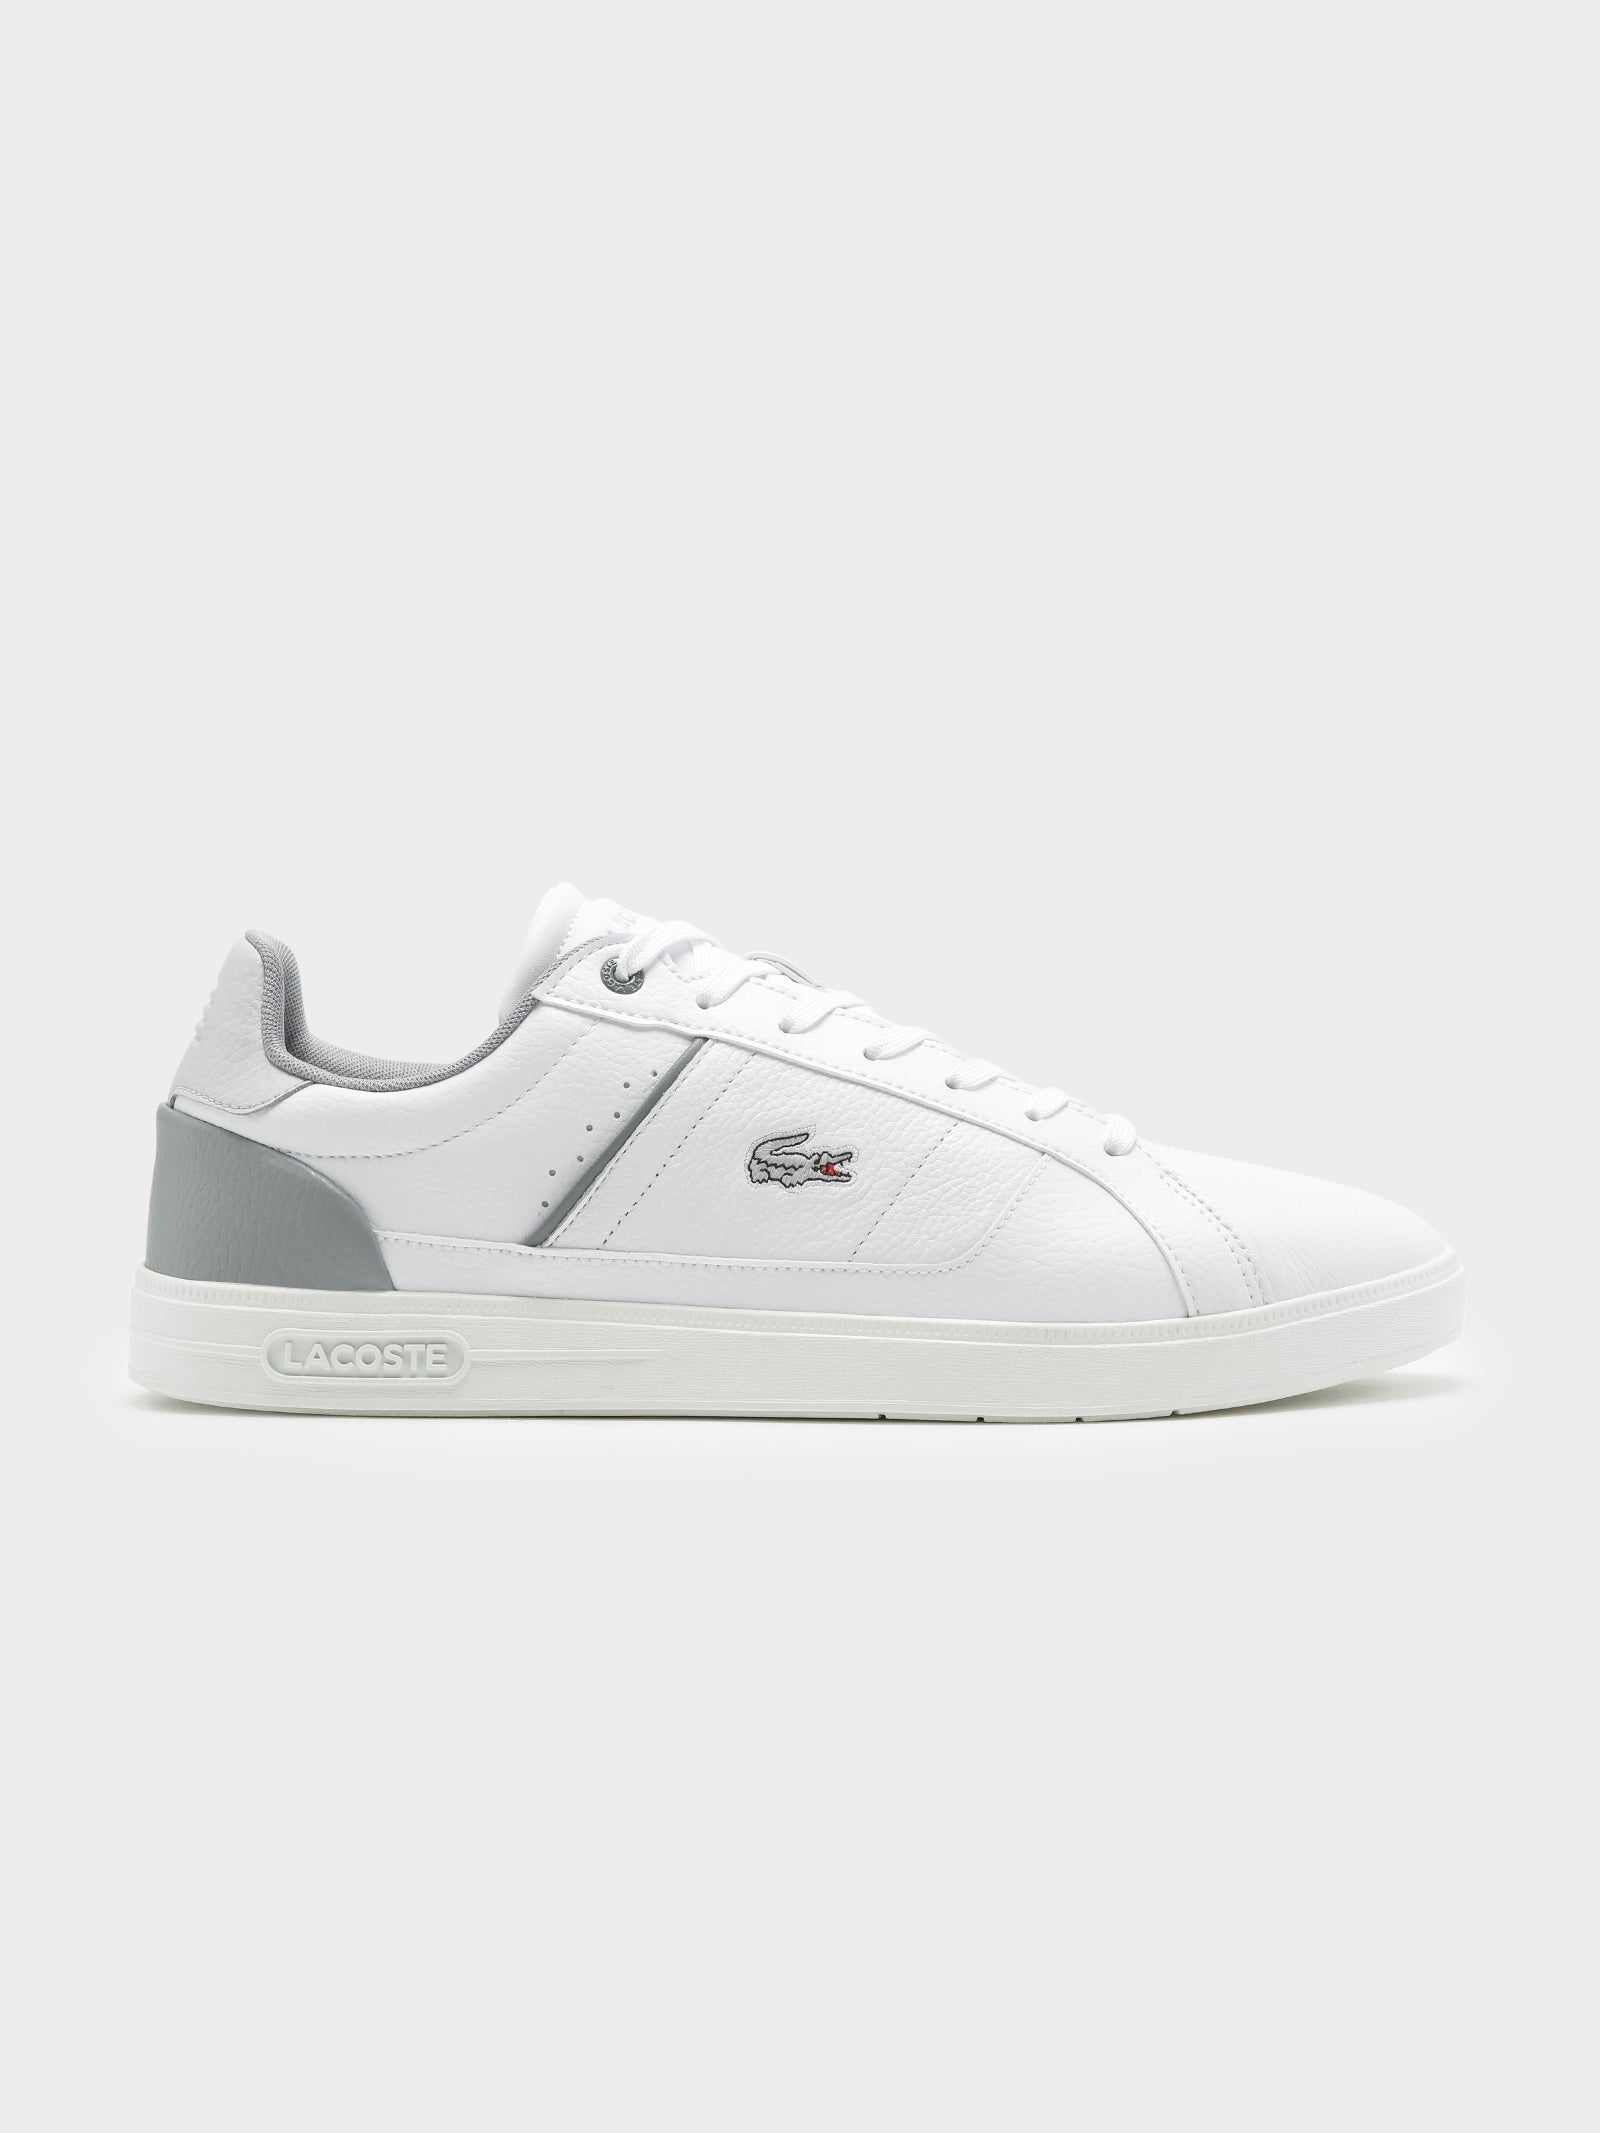 Mens Europa Pro Sneakers in White & Grey - Glue Store